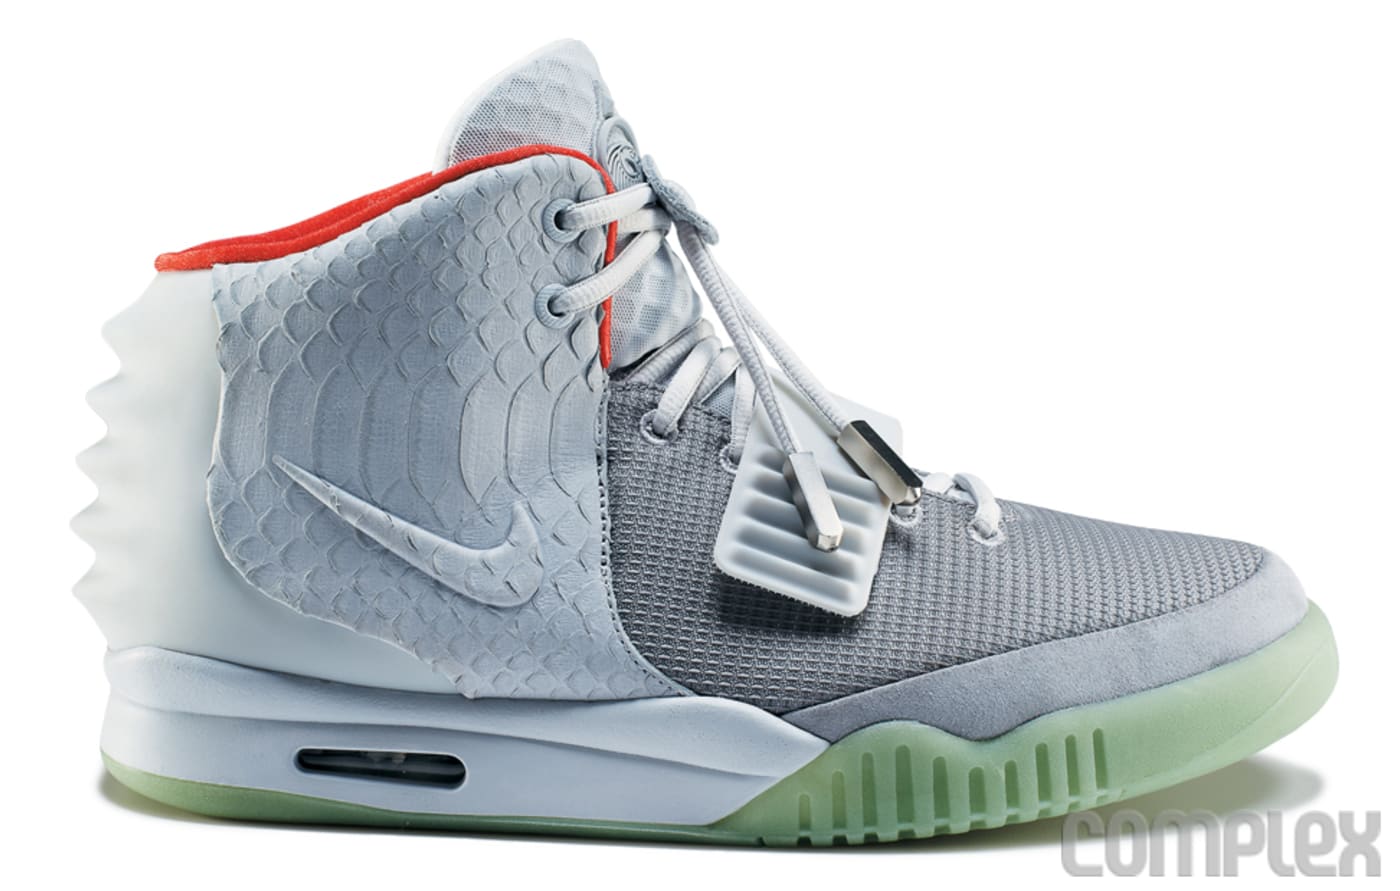 Gallery: Exclusive Sketches And Photos of the Nike Air Yeezy II